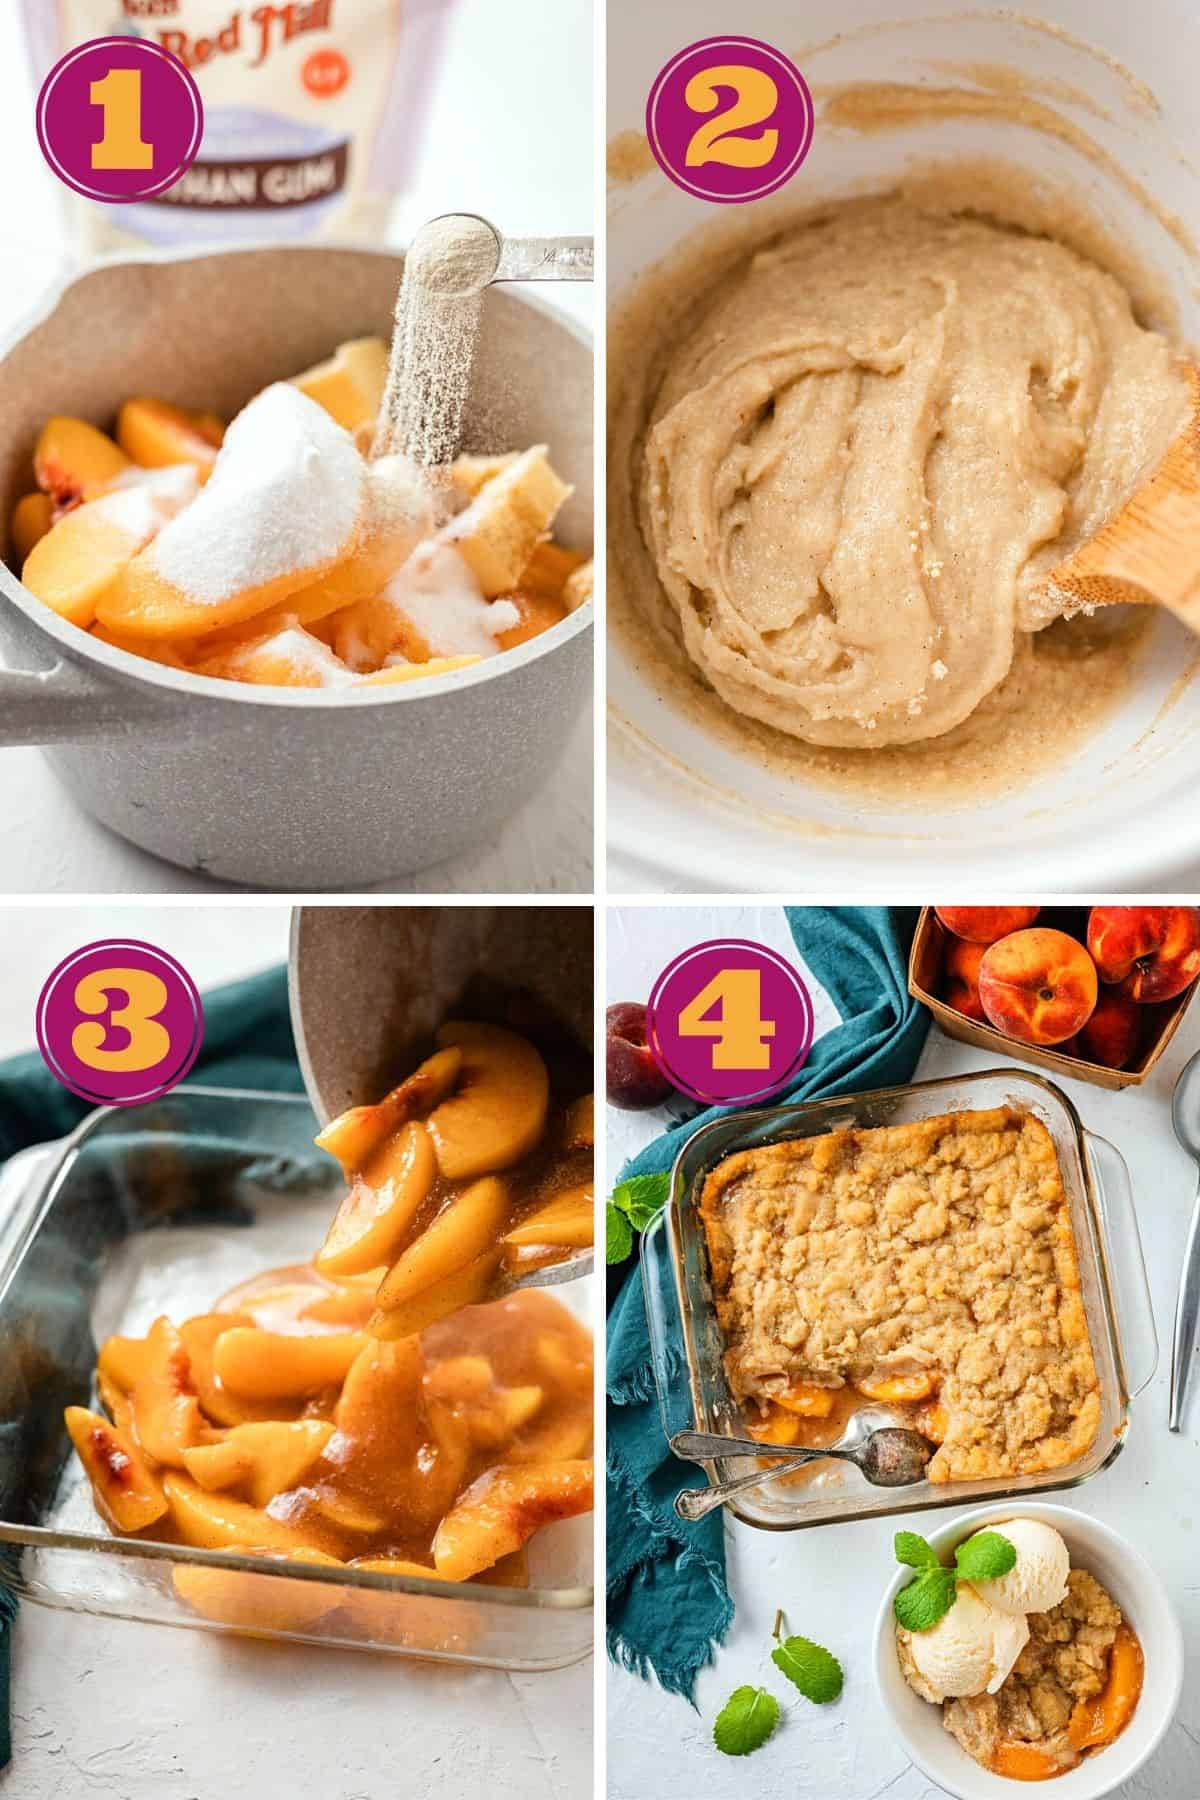 step-by-step instructions for how to make Keto Peach Cobbler with almond flour